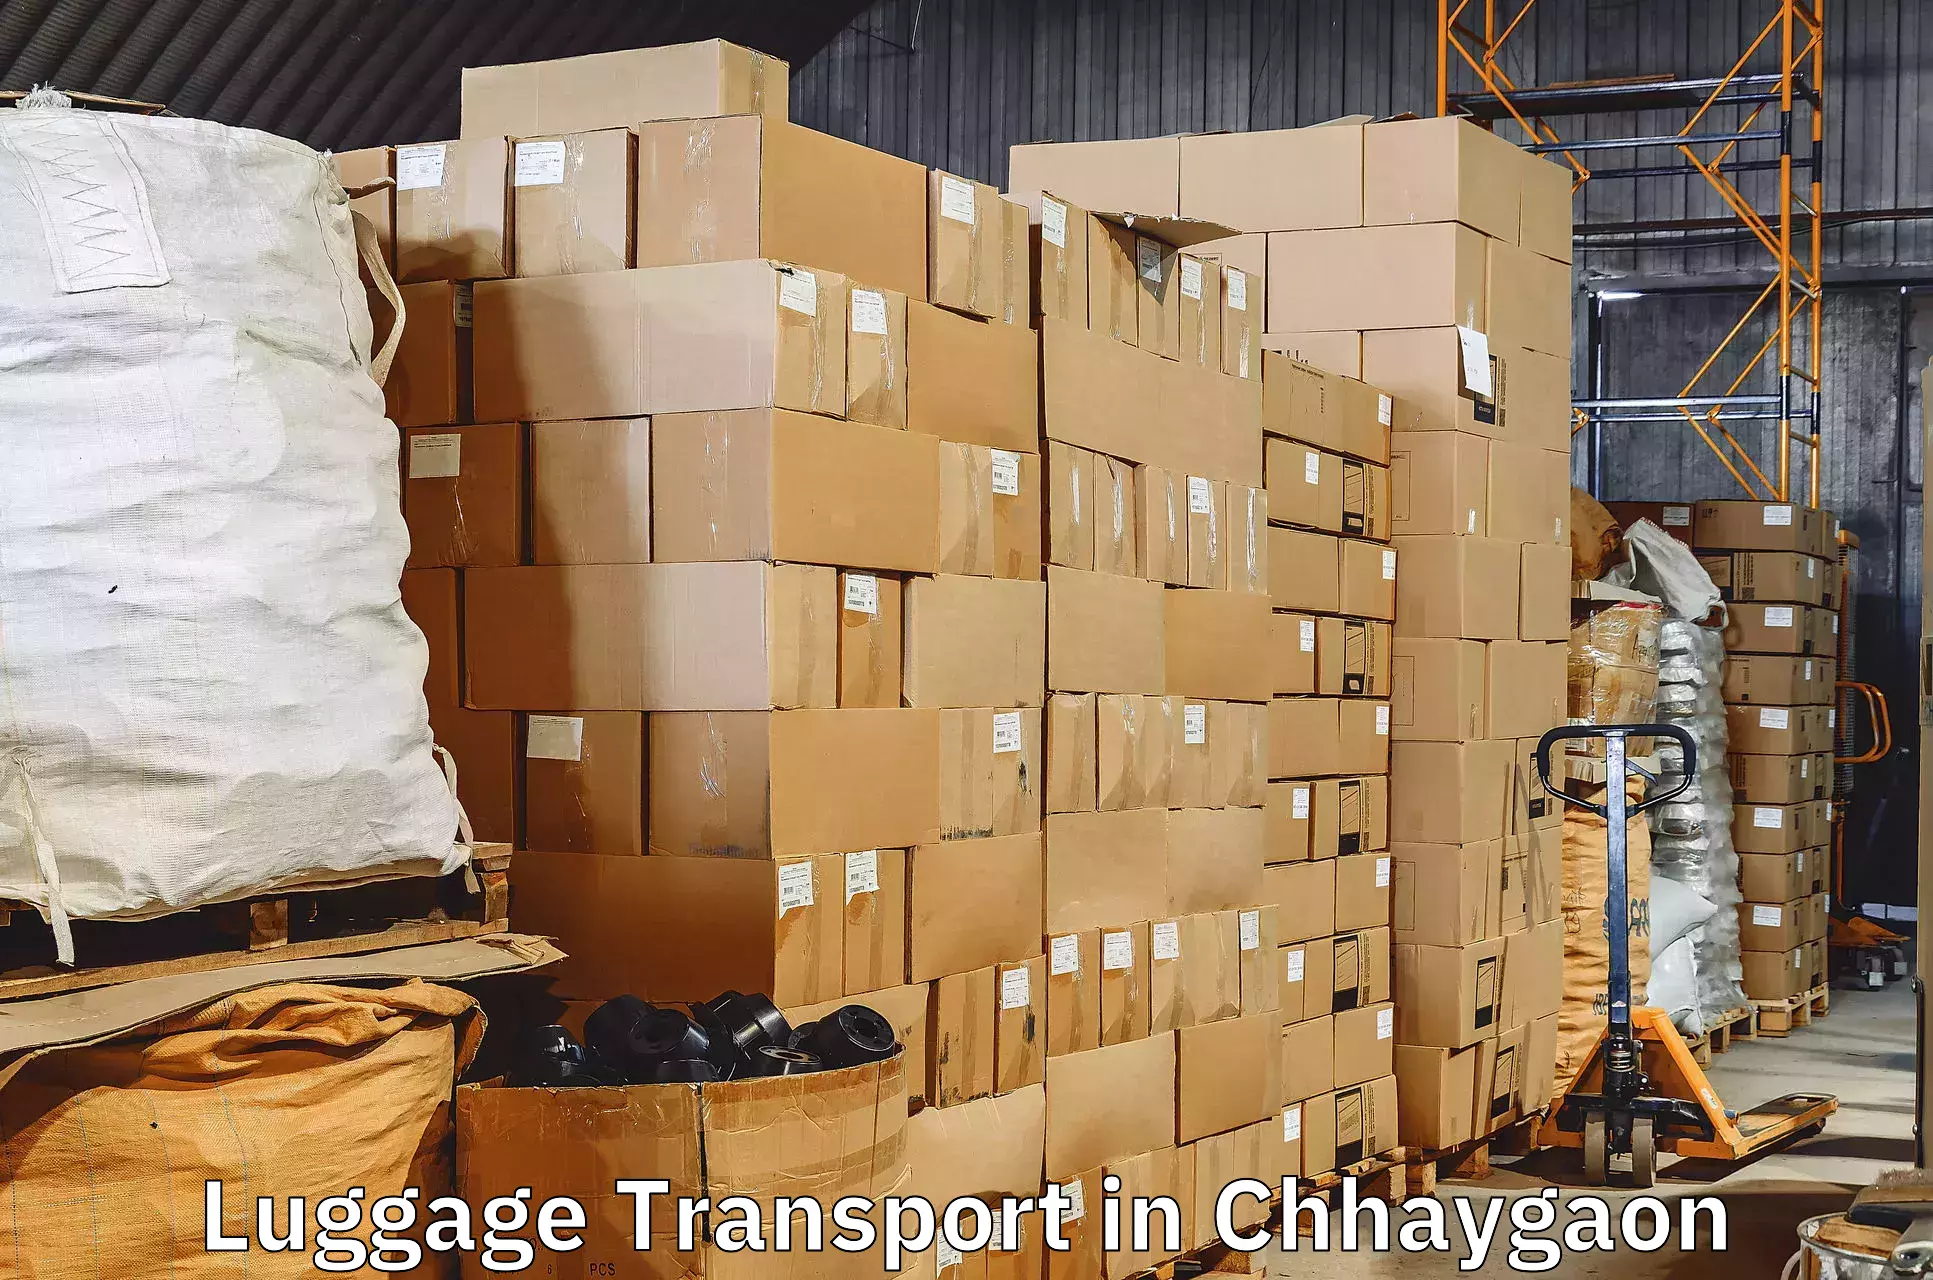 Luggage delivery operations in Chhaygaon